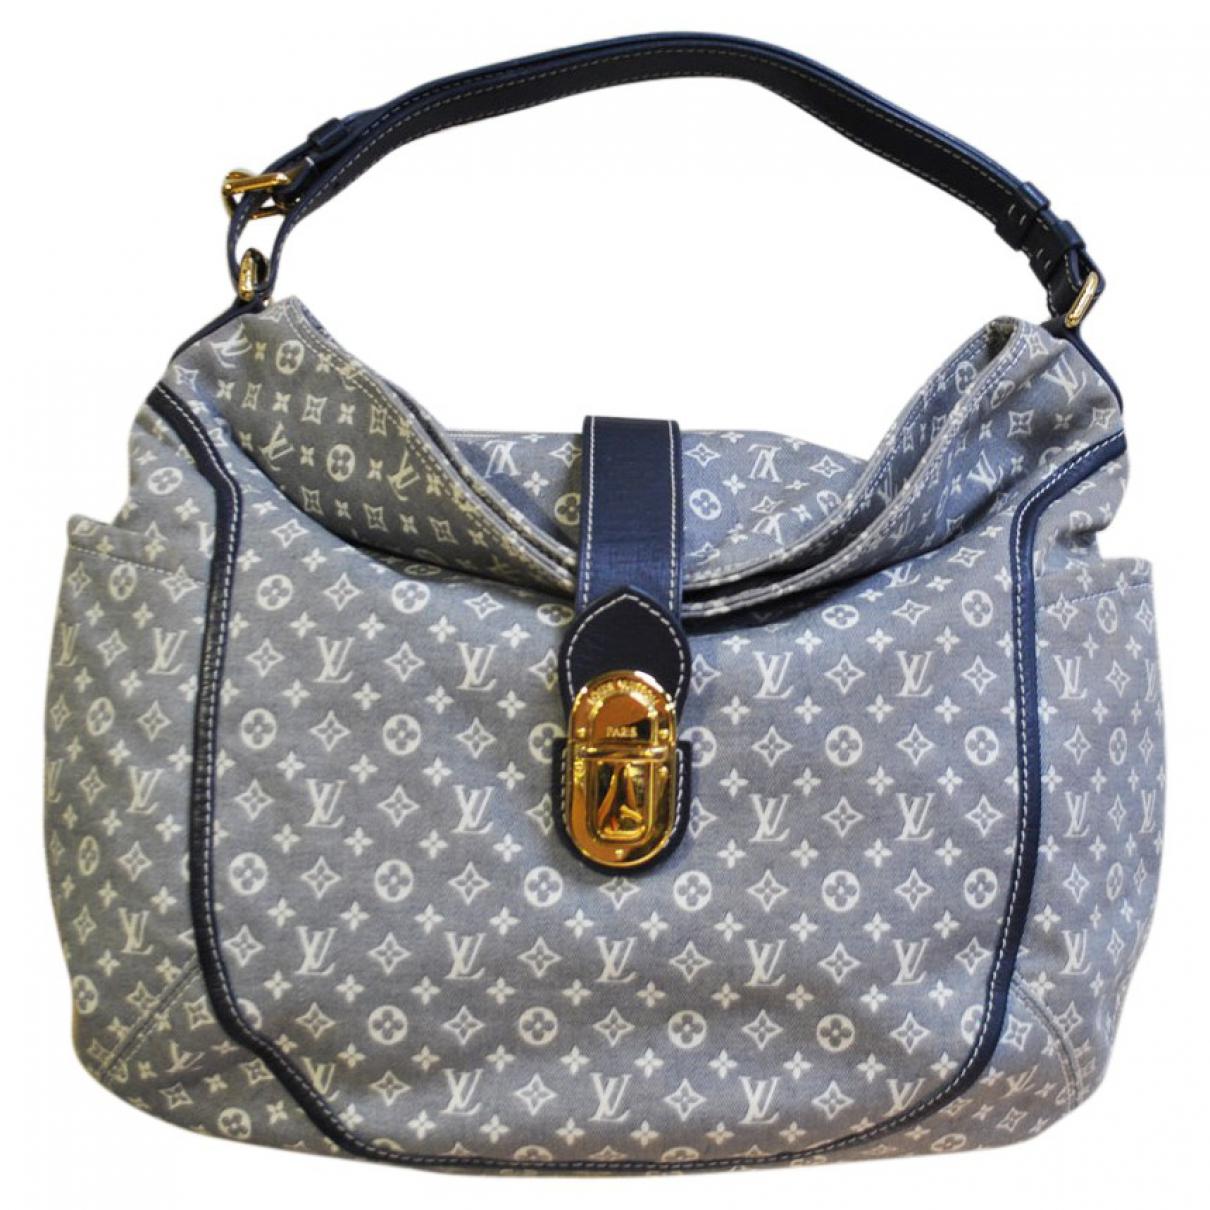 Fabric Louis Vuitton Bags Clearance, 50% OFF | www.vetyvet.com